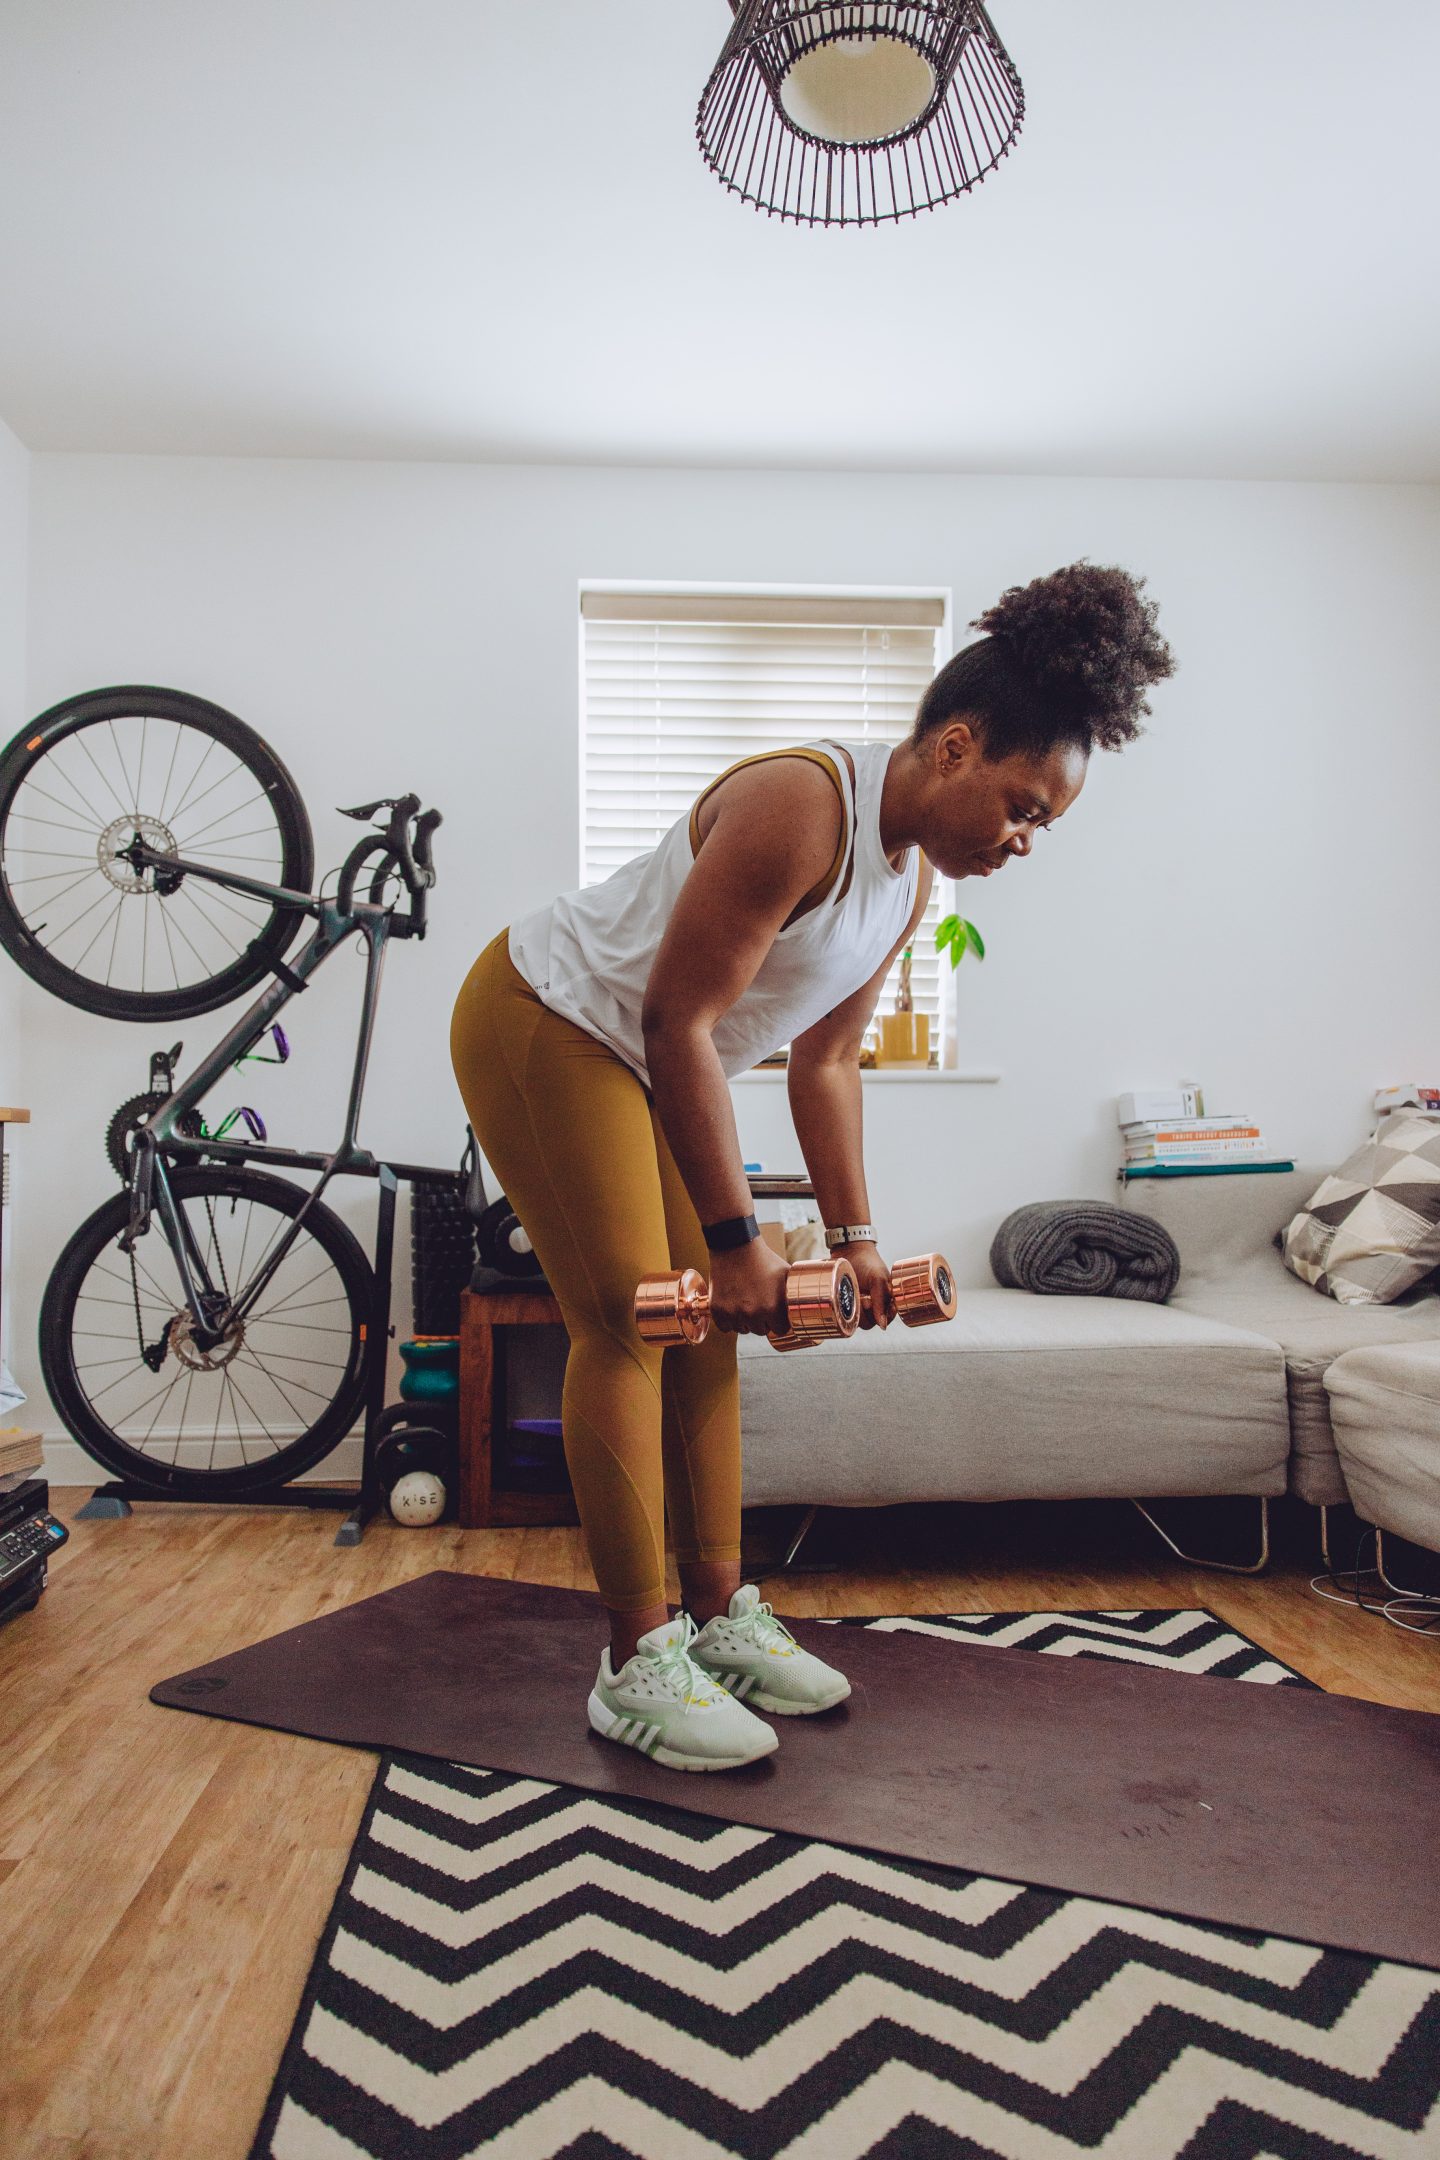 Why Strength Training Is Important For Women